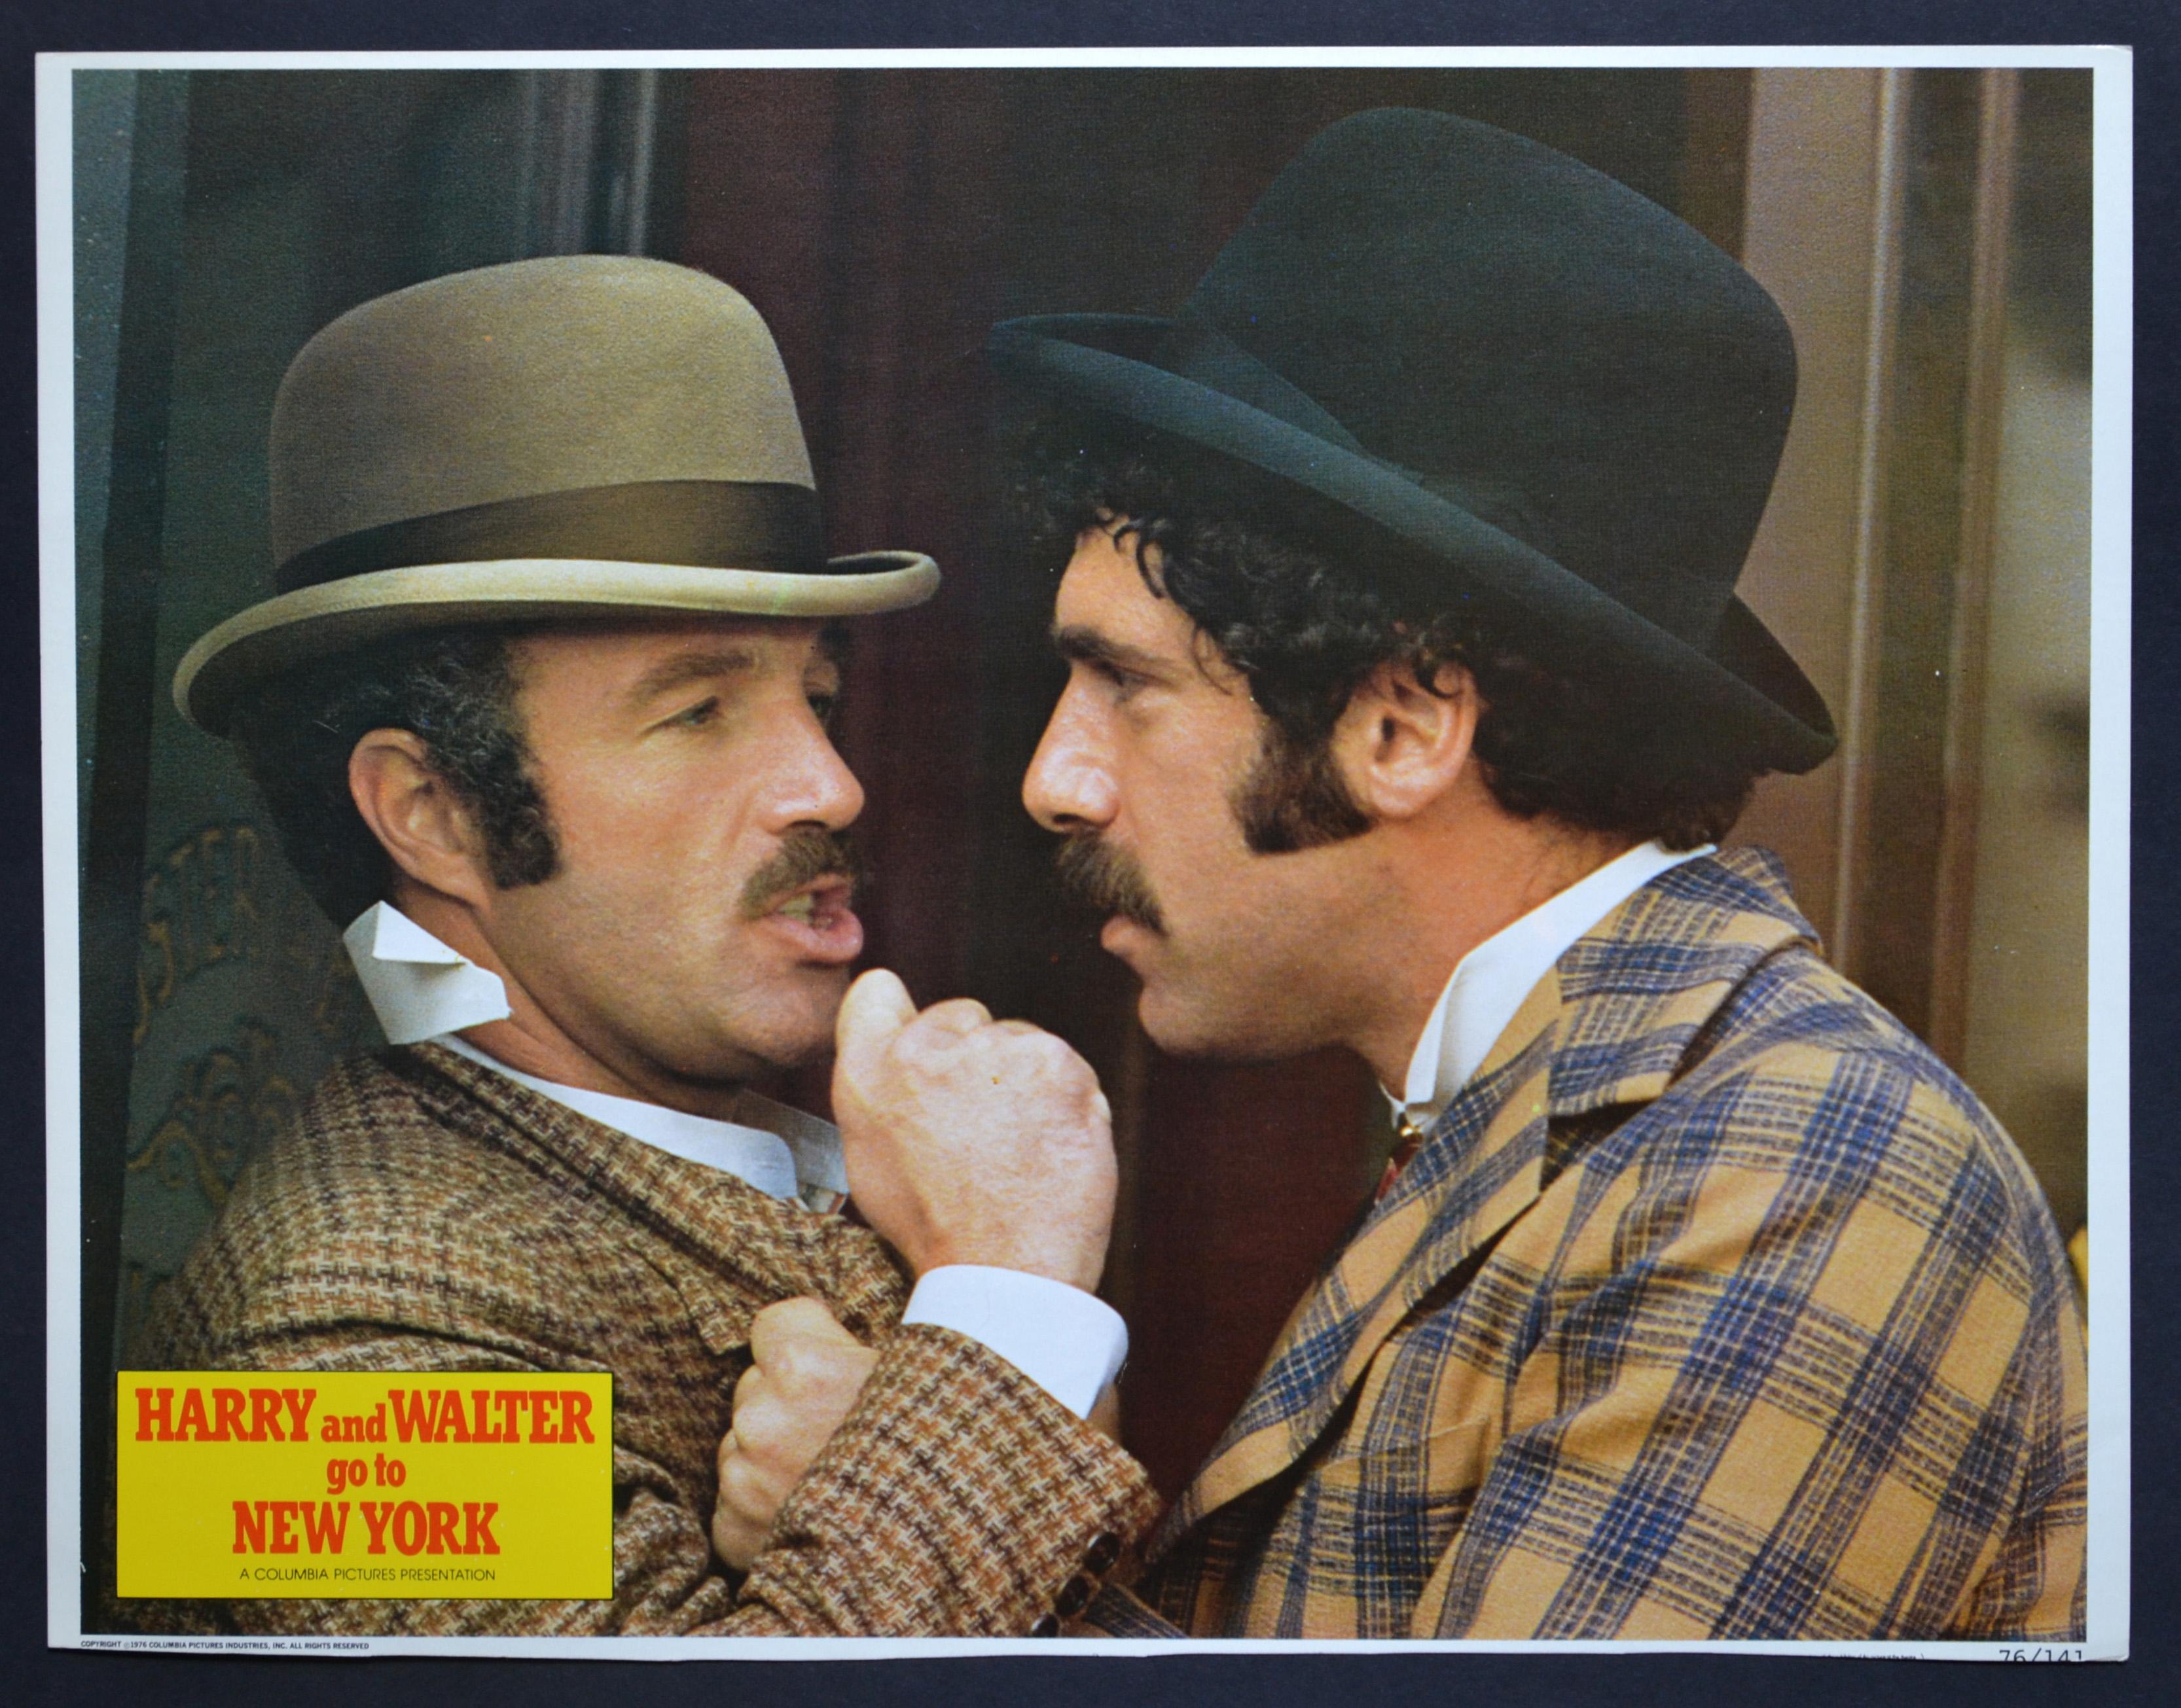 Unknown Interior Print - „HARRY AND WALTER GO TO NEW YORK“ Original American Lobby Card of the Movie, 1976